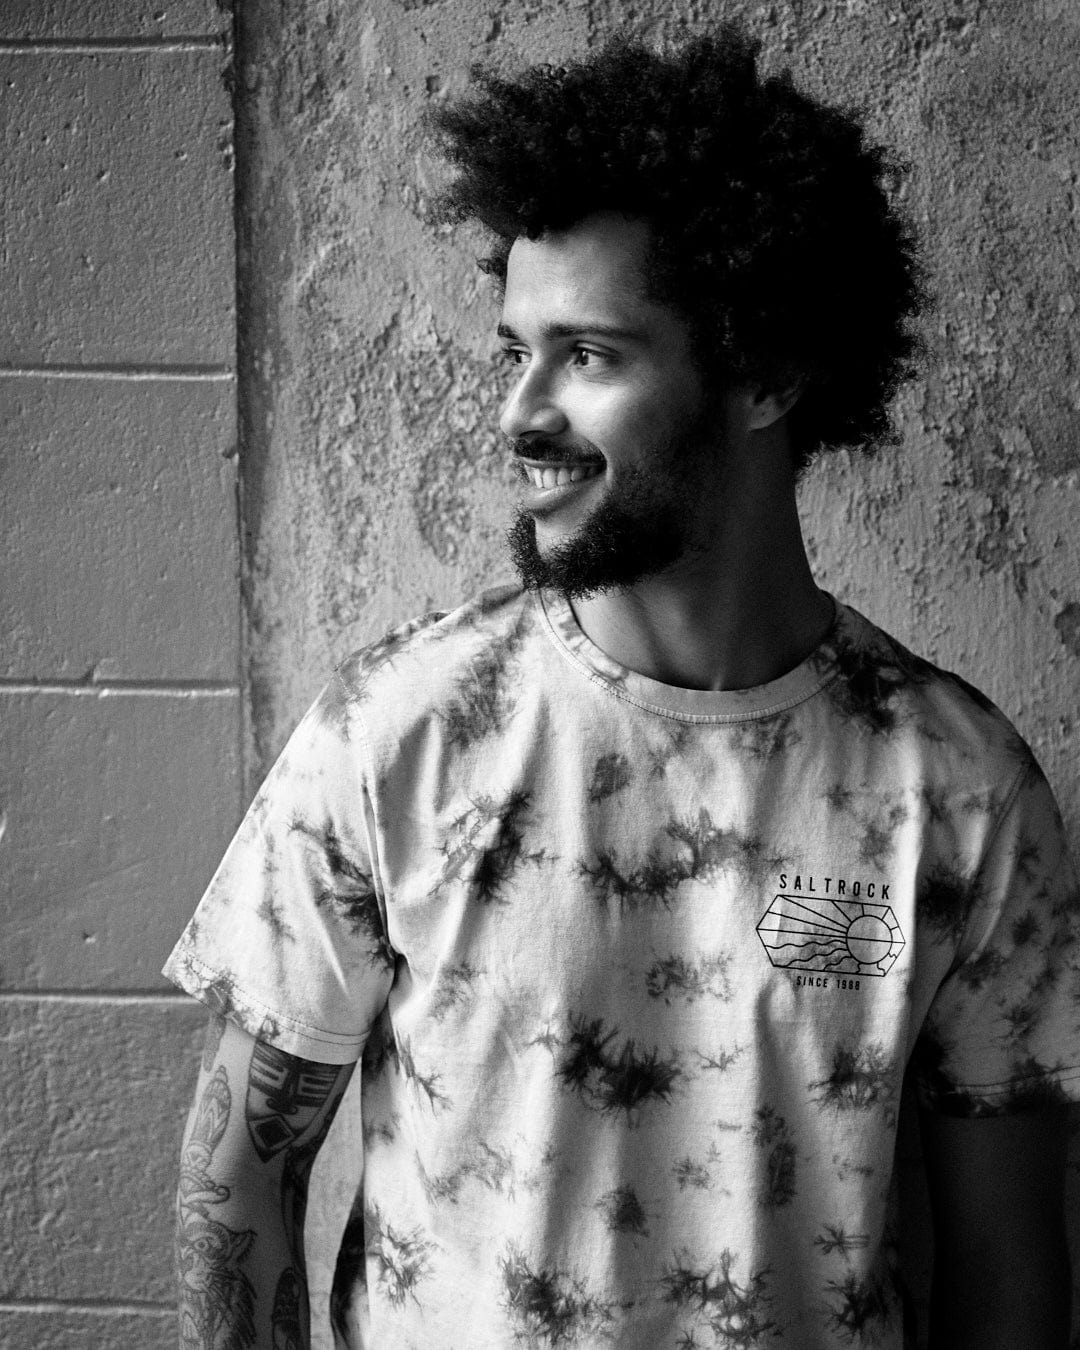 A man with curly hair and a beard smiling in a Saltrock Vantage Outline - Mens Tie Dye T-Shirt - Green, standing against a textured wall, in a black and white photograph.